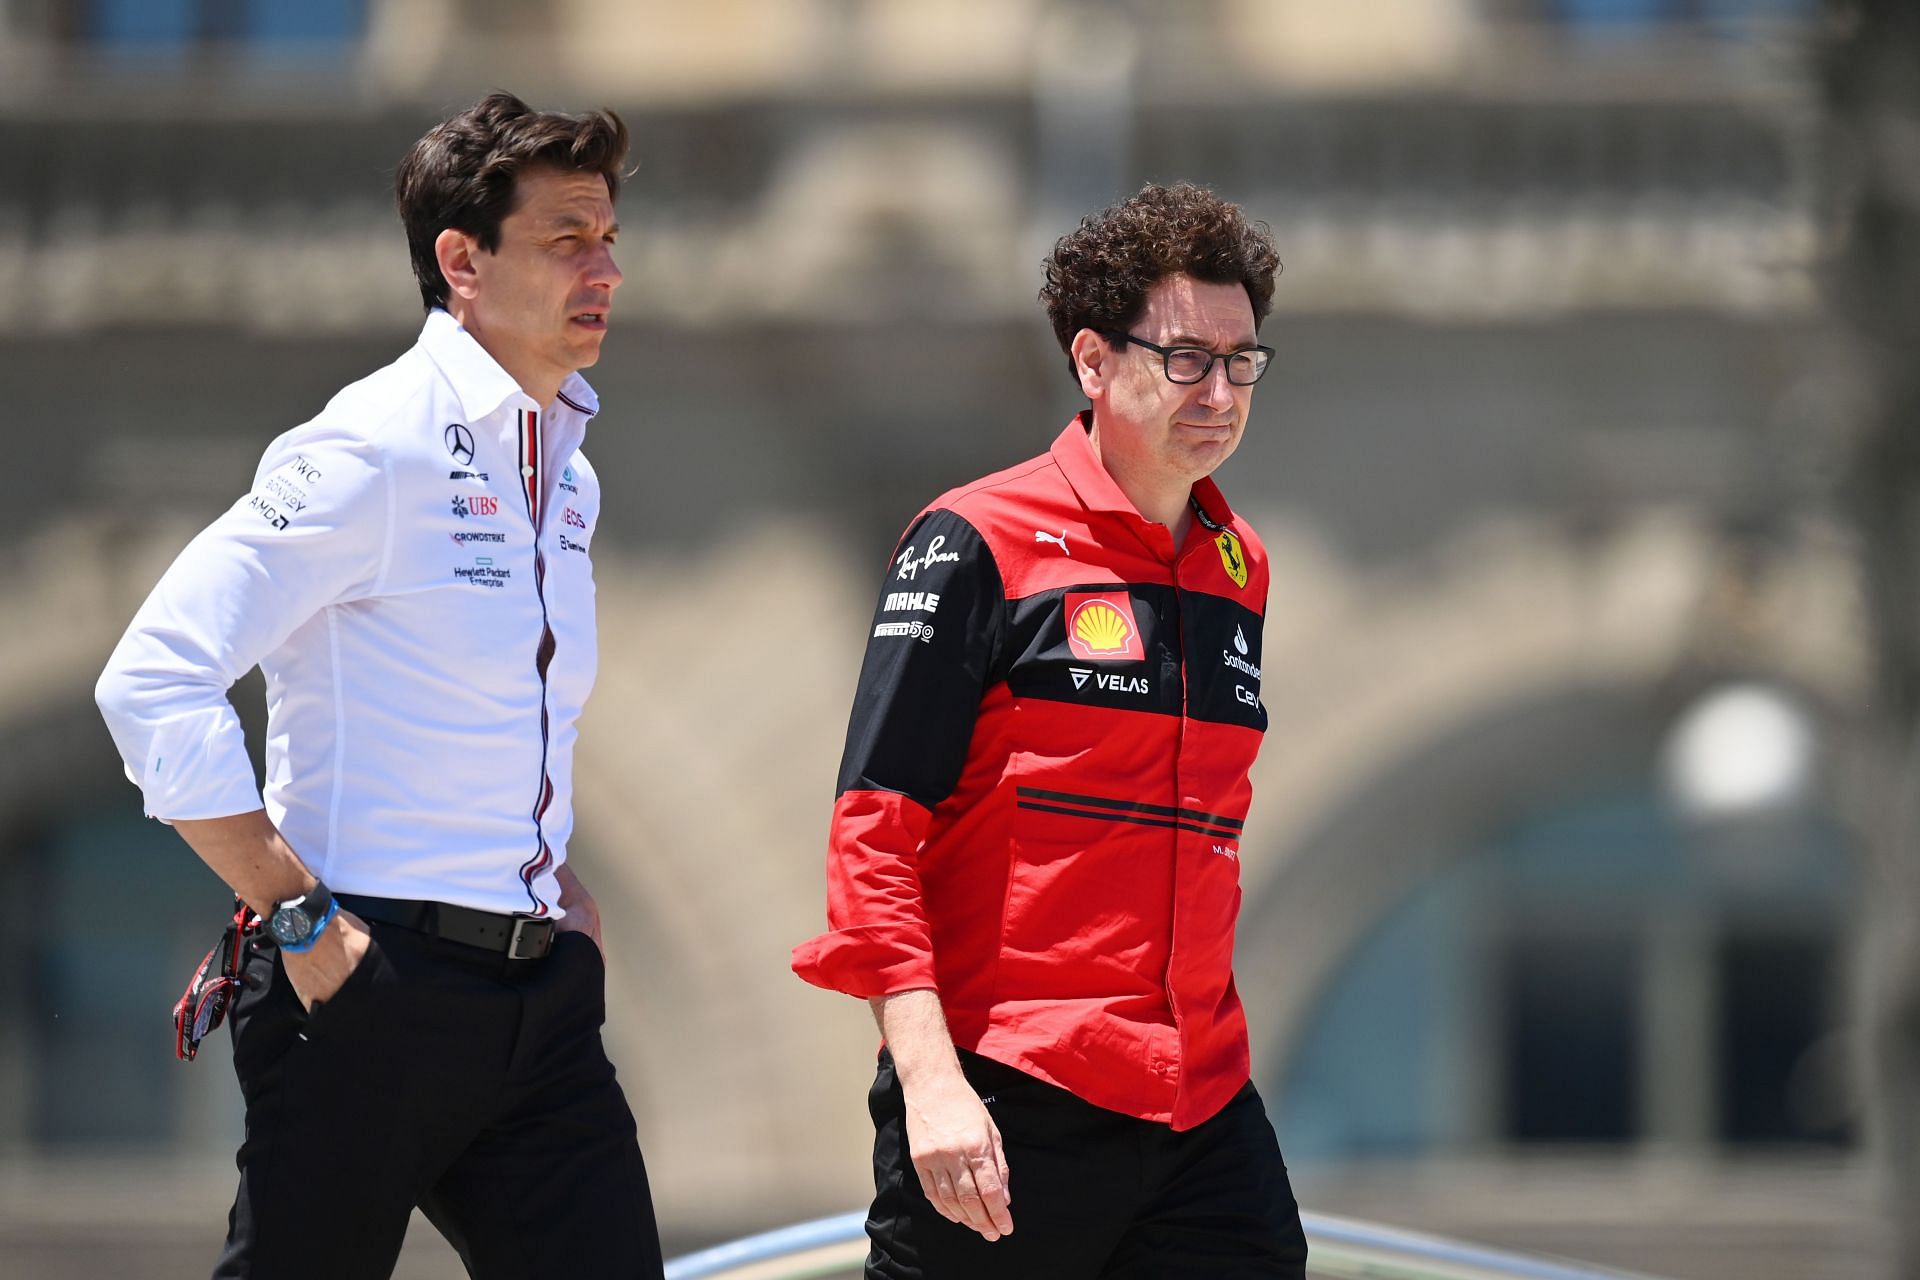 Toto Wolff feels the hard tire choice by Ferrari cost them the win